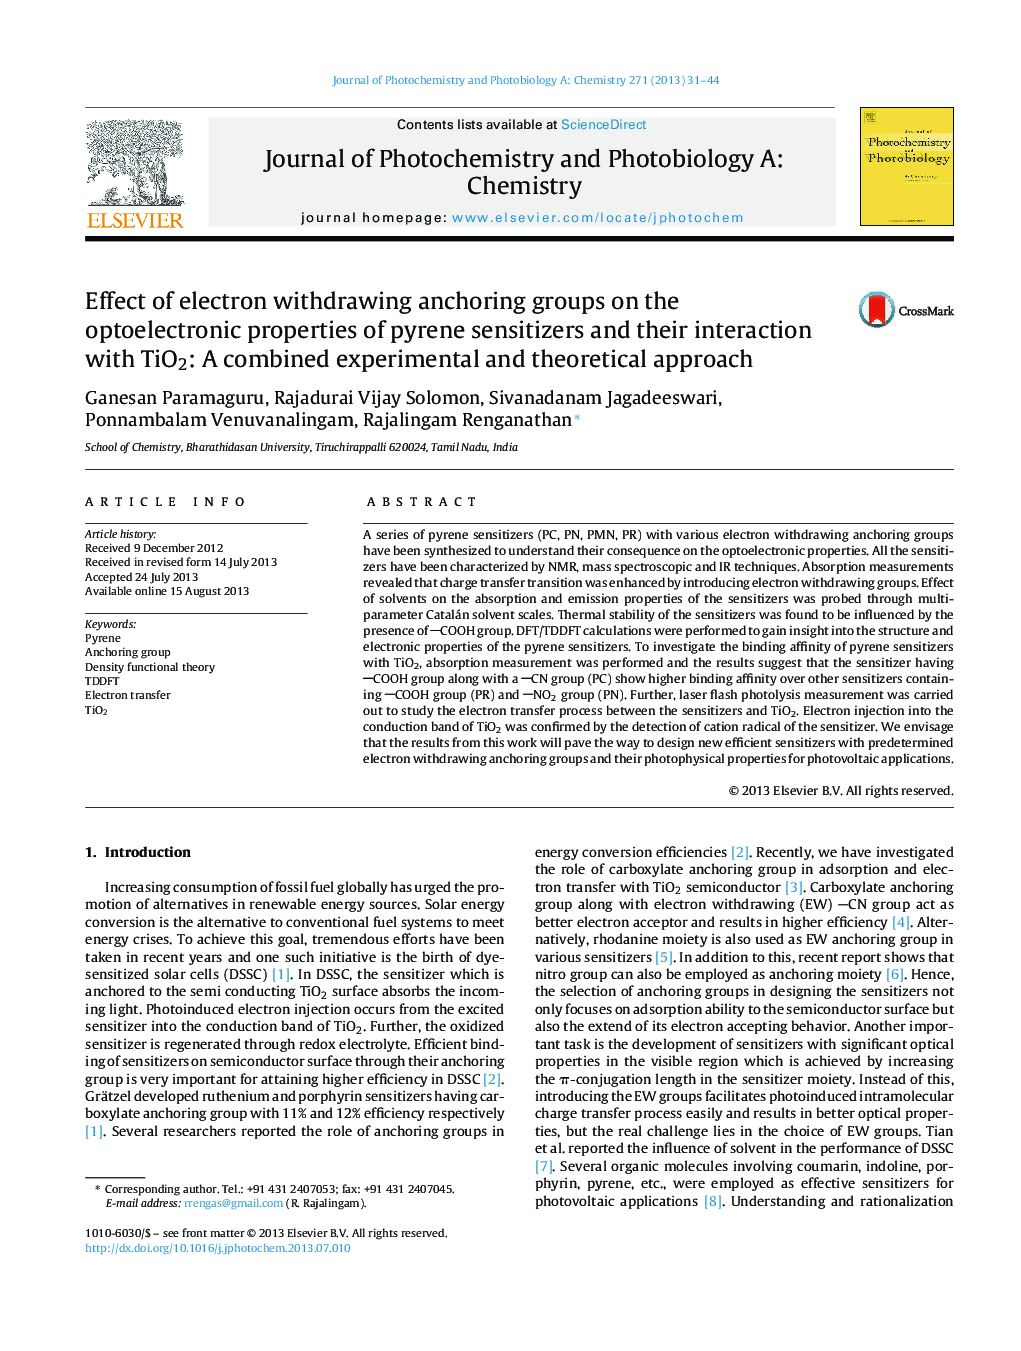 Effect of electron withdrawing anchoring groups on the optoelectronic properties of pyrene sensitizers and their interaction with TiO2: A combined experimental and theoretical approach